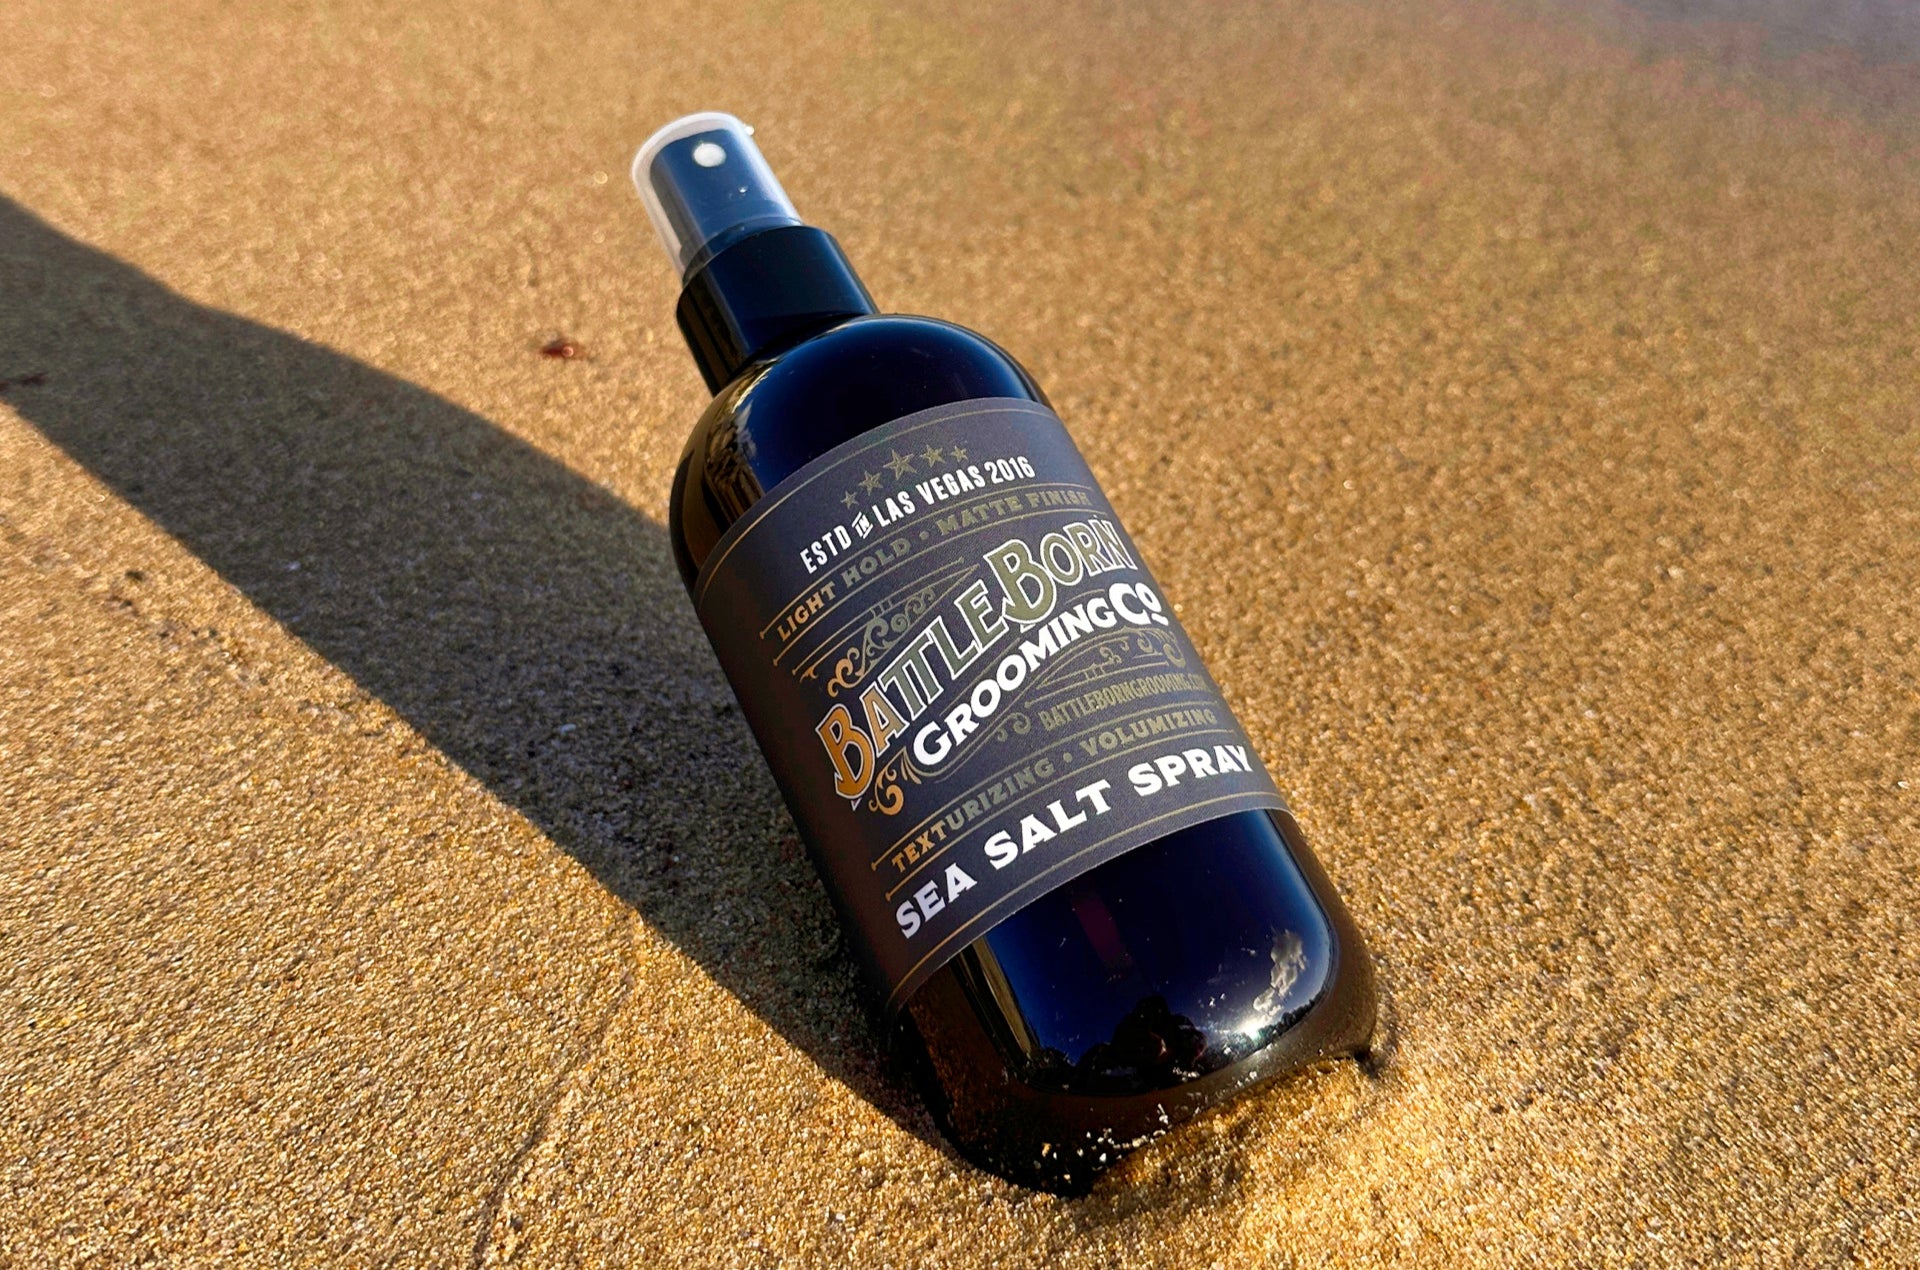 A bottle of Battle Born Grooming Co Sea Salt Spray nestled in a bed of sandy beach, evoking a sense of coastal freshness and natural beauty.